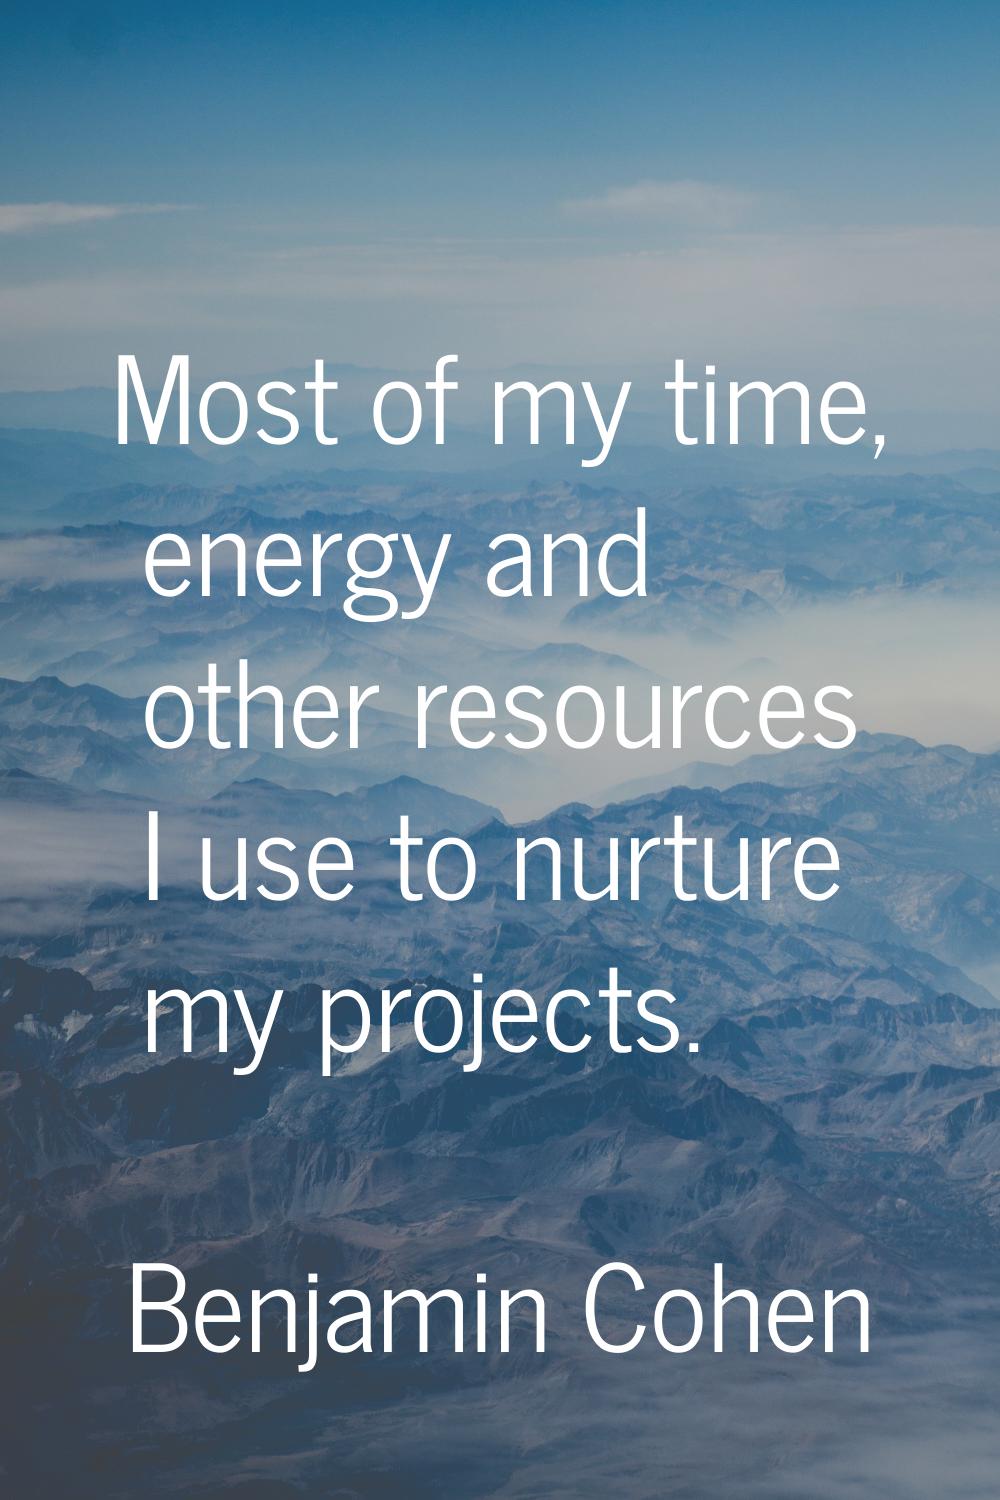 Most of my time, energy and other resources I use to nurture my projects.